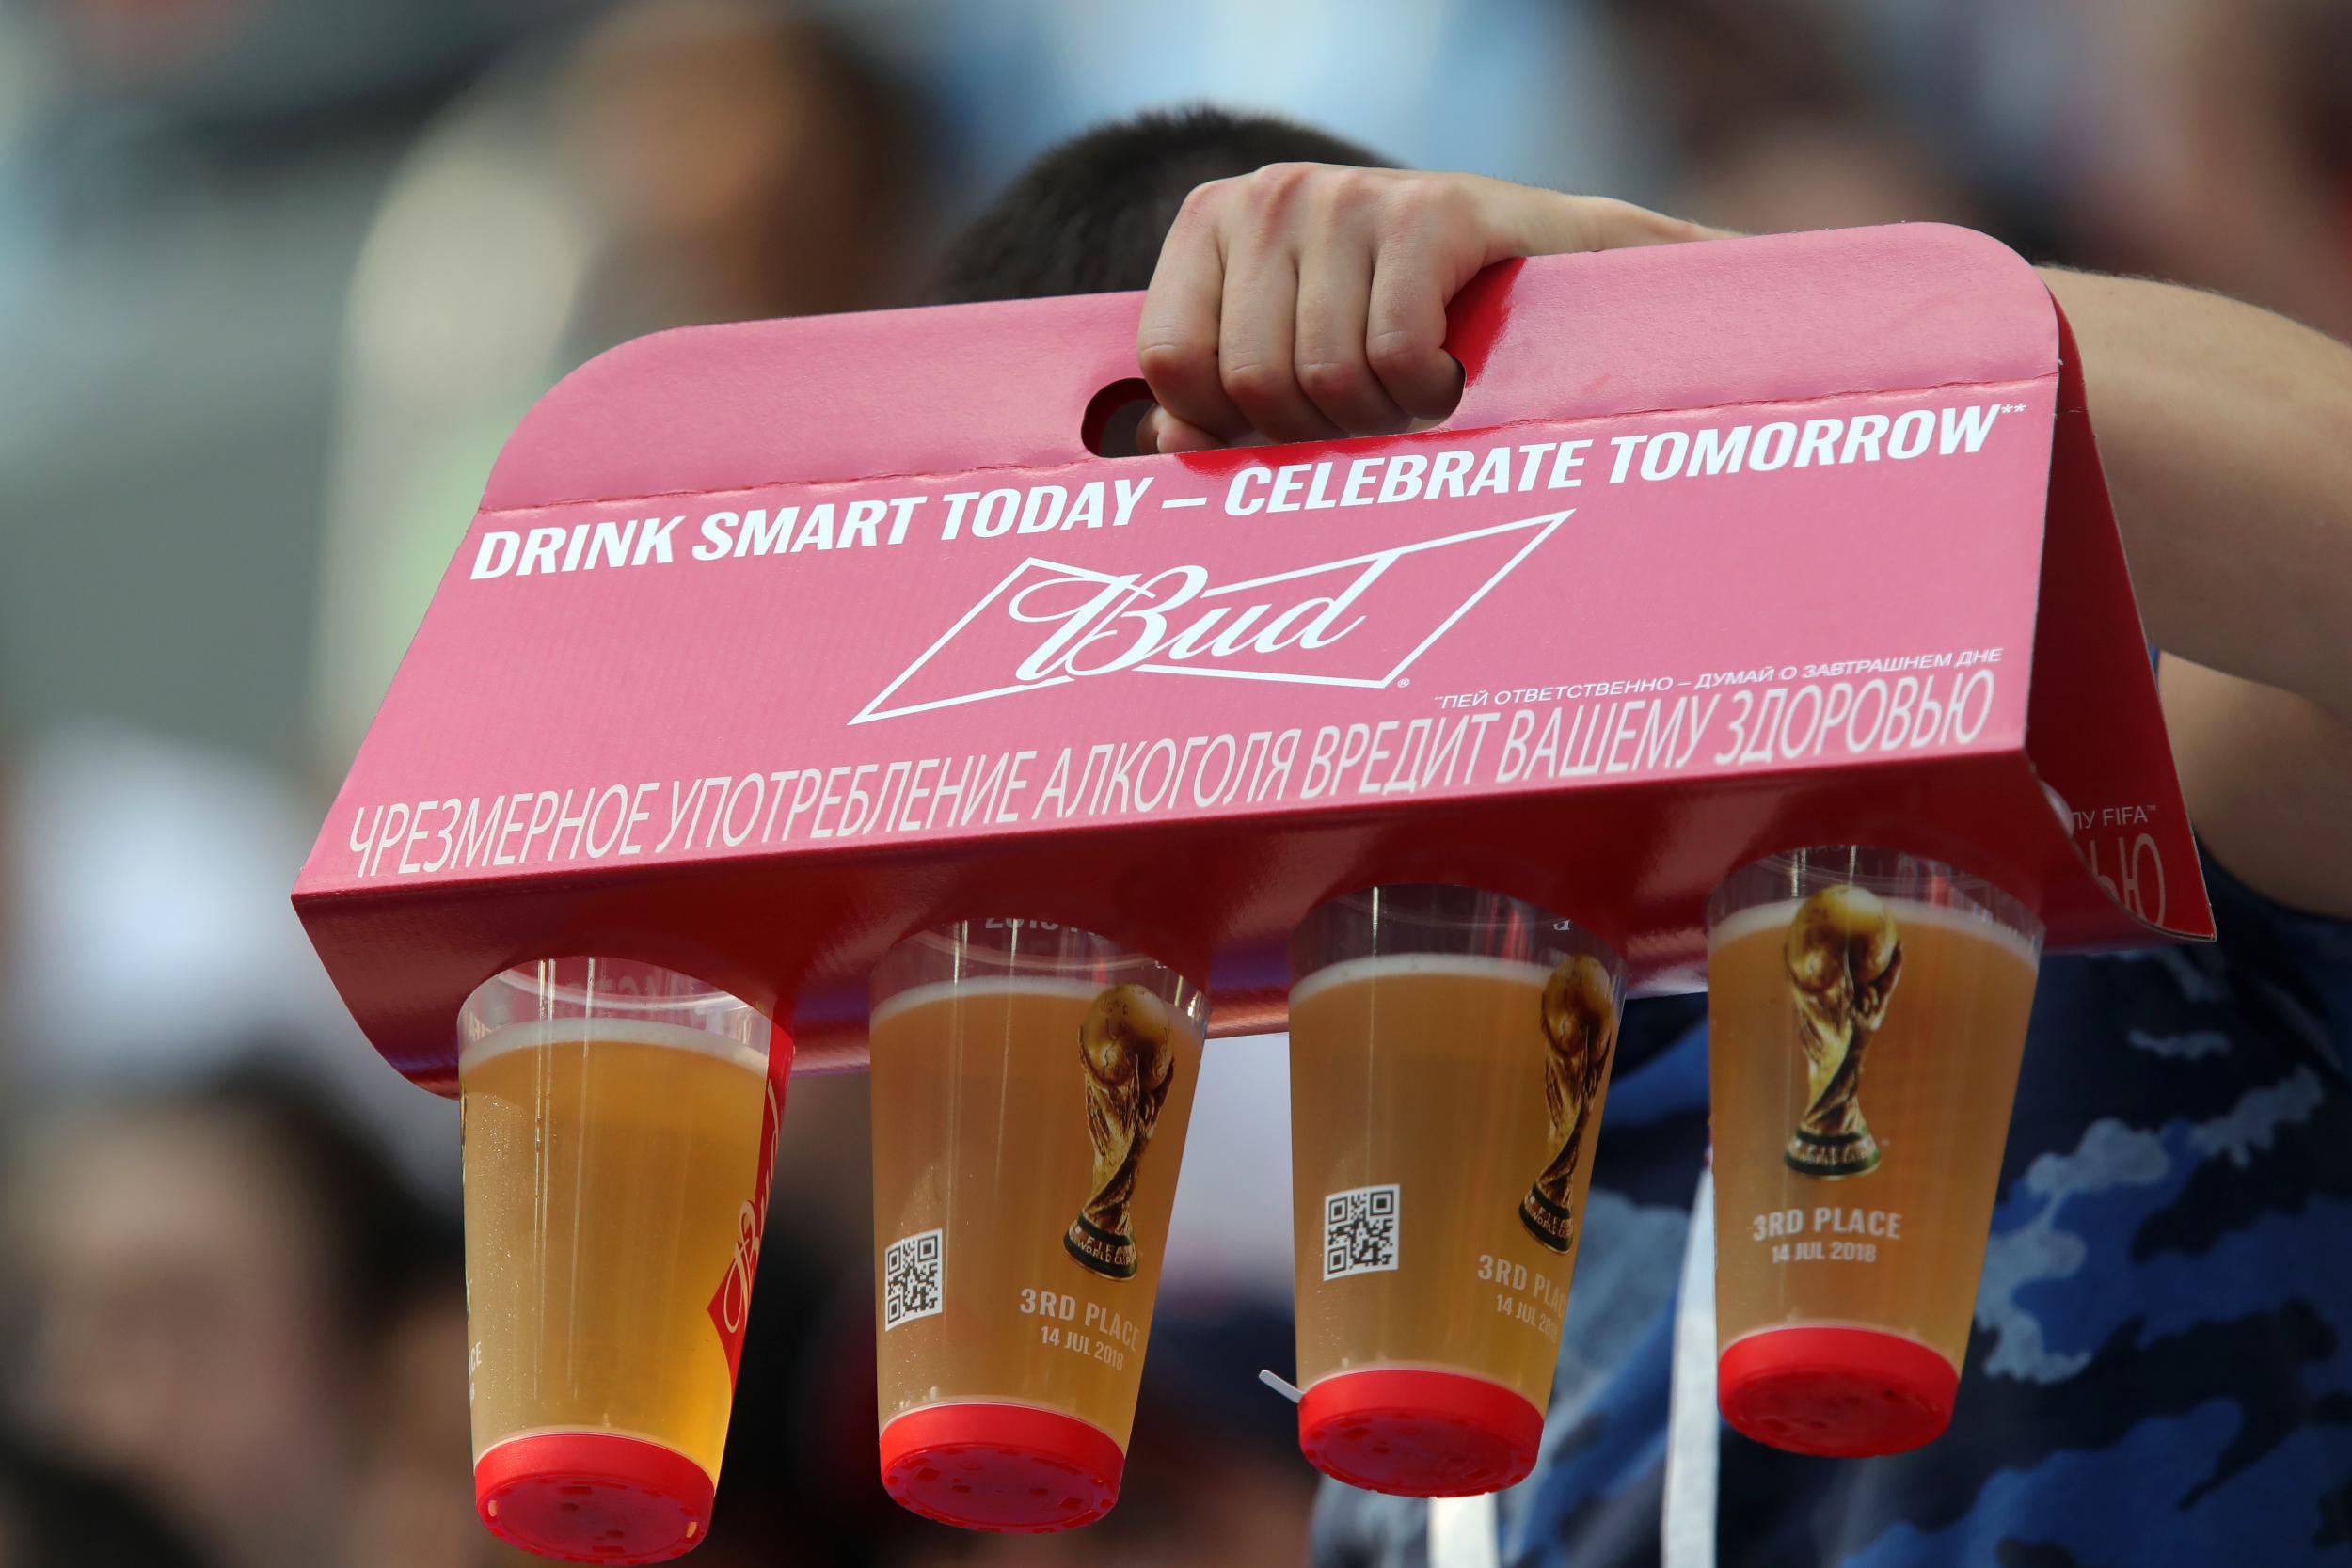 EFL chairman calls for review of &apos;blanket ban&apos; on alcohol during football matches